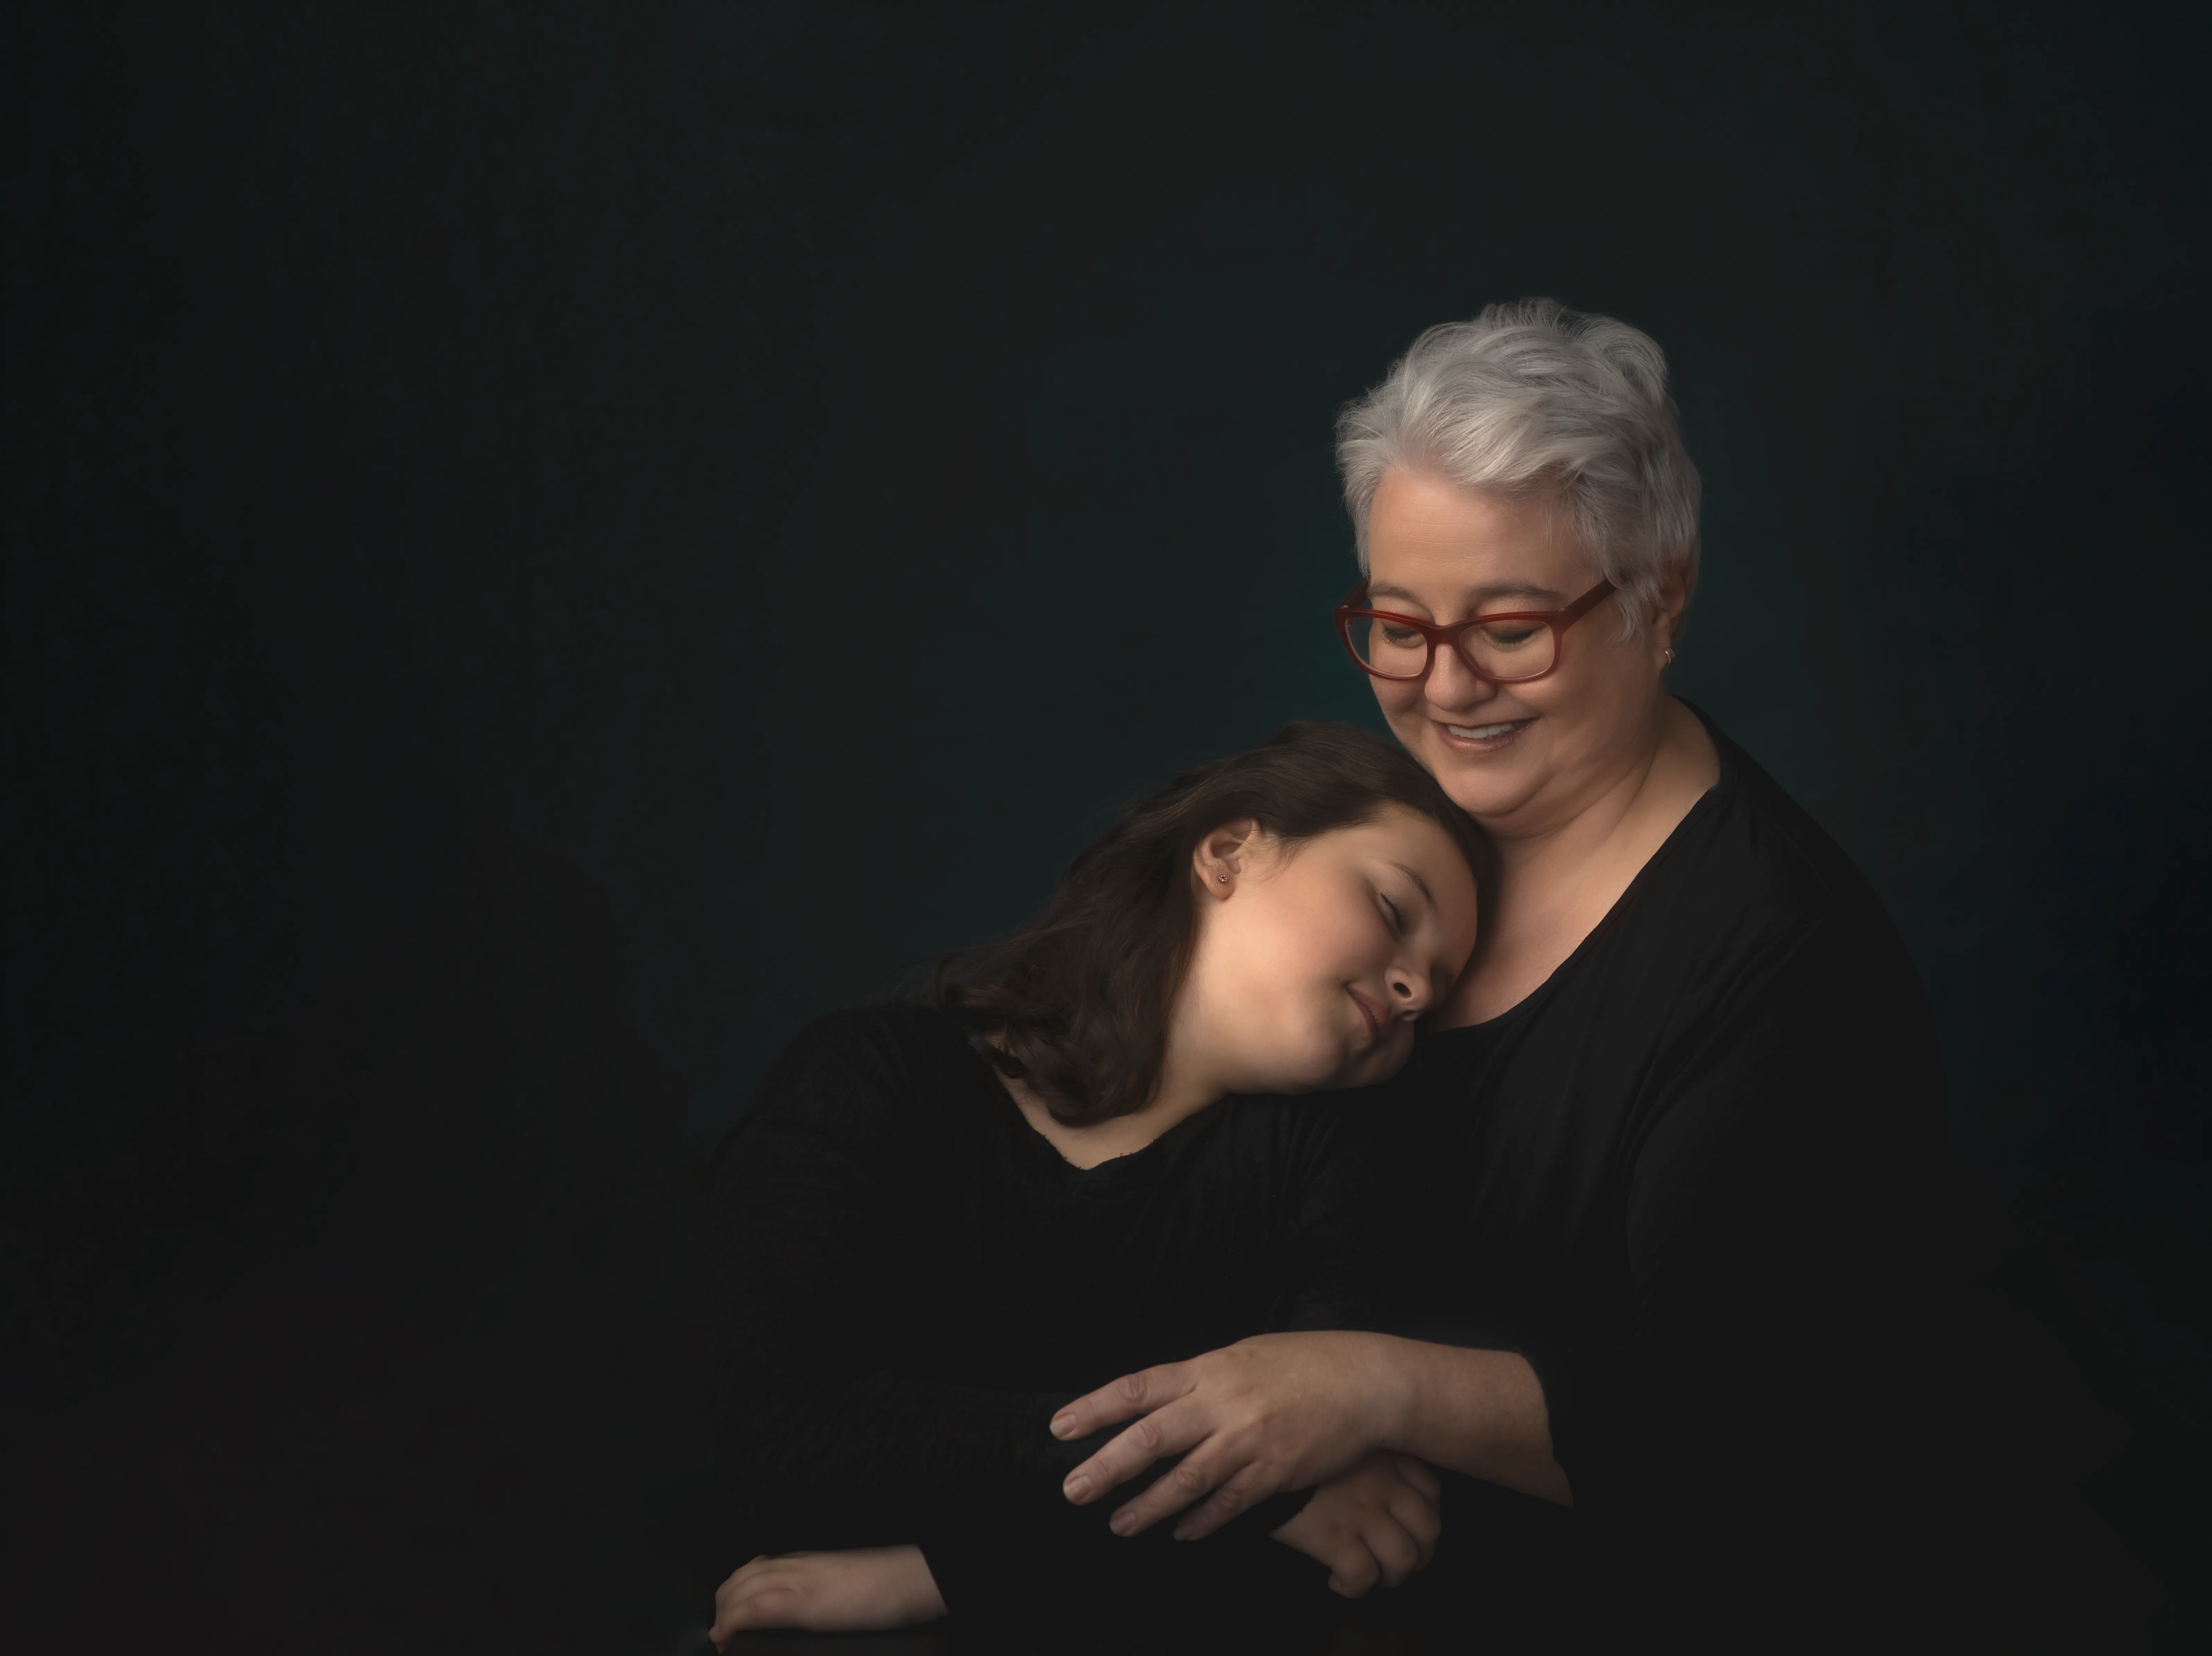 mom and daughter portrait